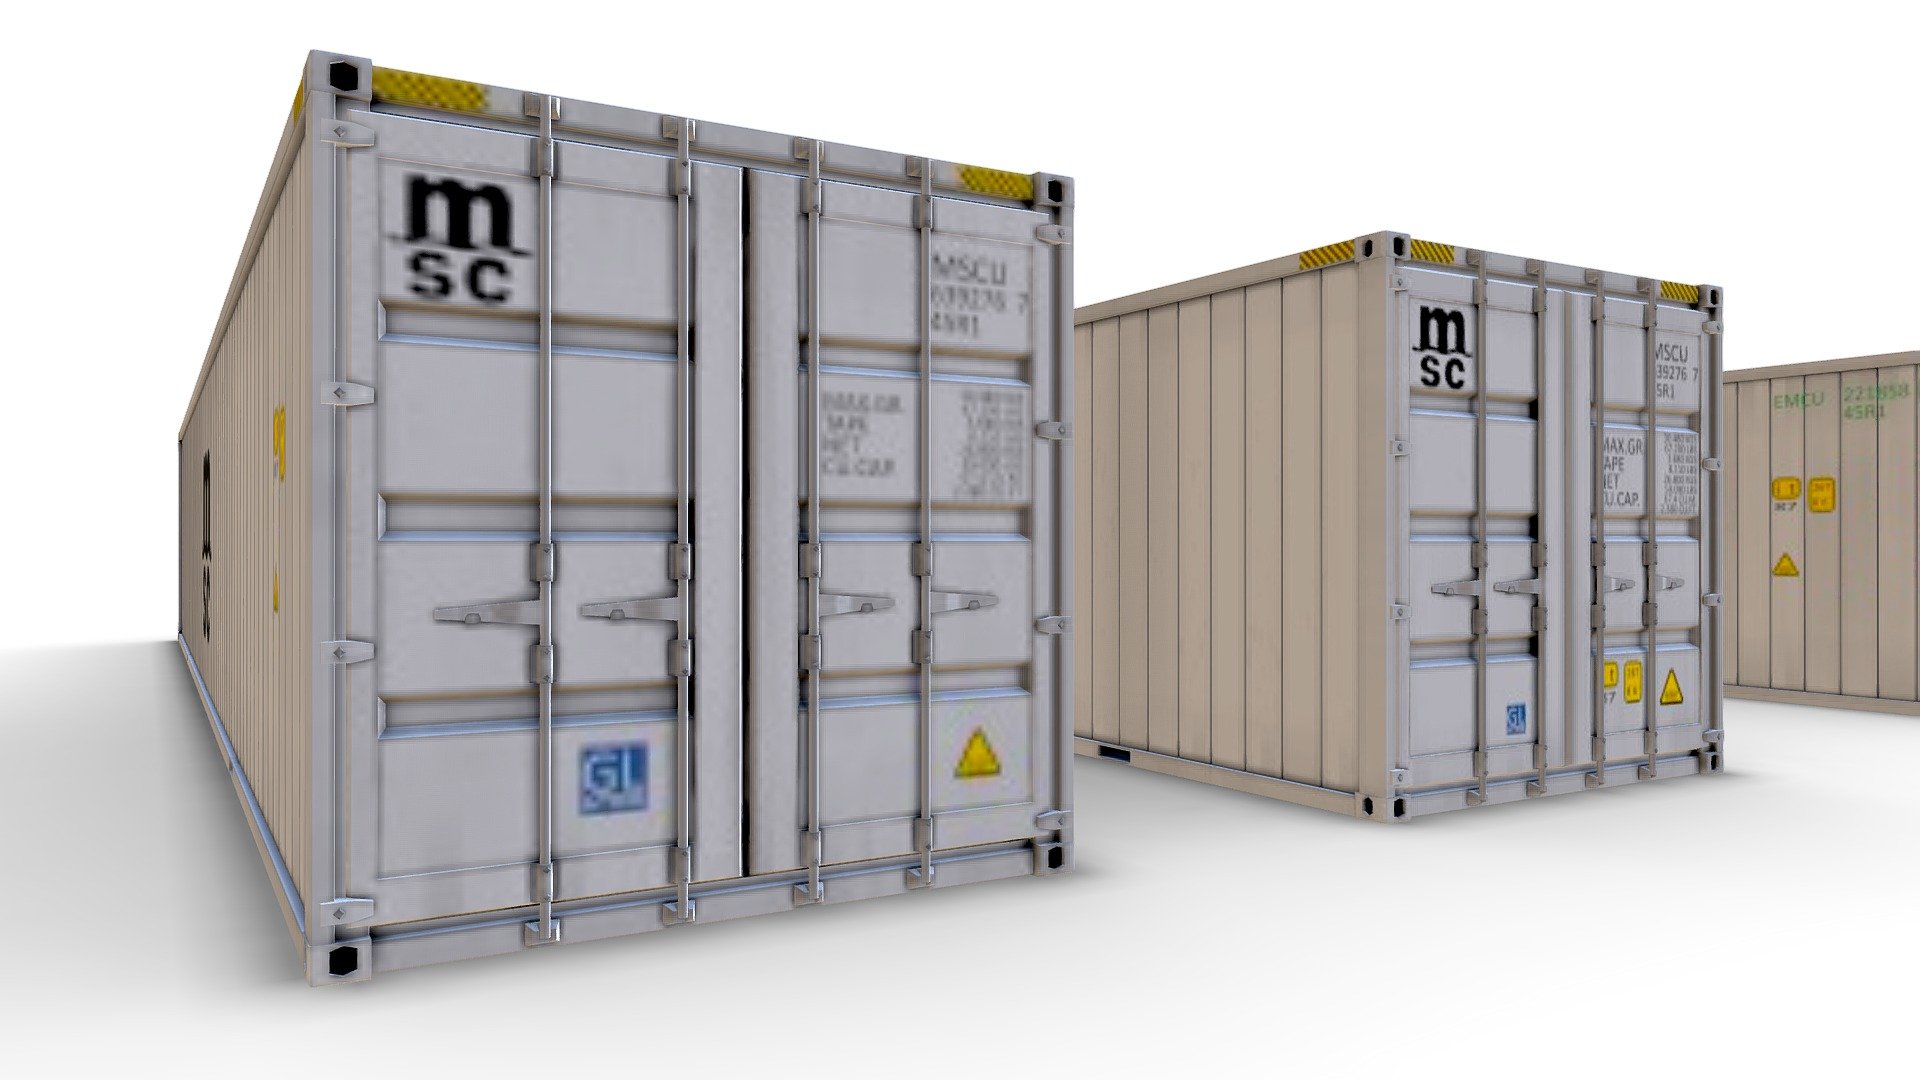 Set Standard Container.
40ft and 20ft containers
4 color options.
12 goods elements
Possibility to create your own container filling.
Doors may be open
Actual sizes of models.
Highly detailed model and texture in 4K
Ready for Games
Ready for near and far renders 3d model